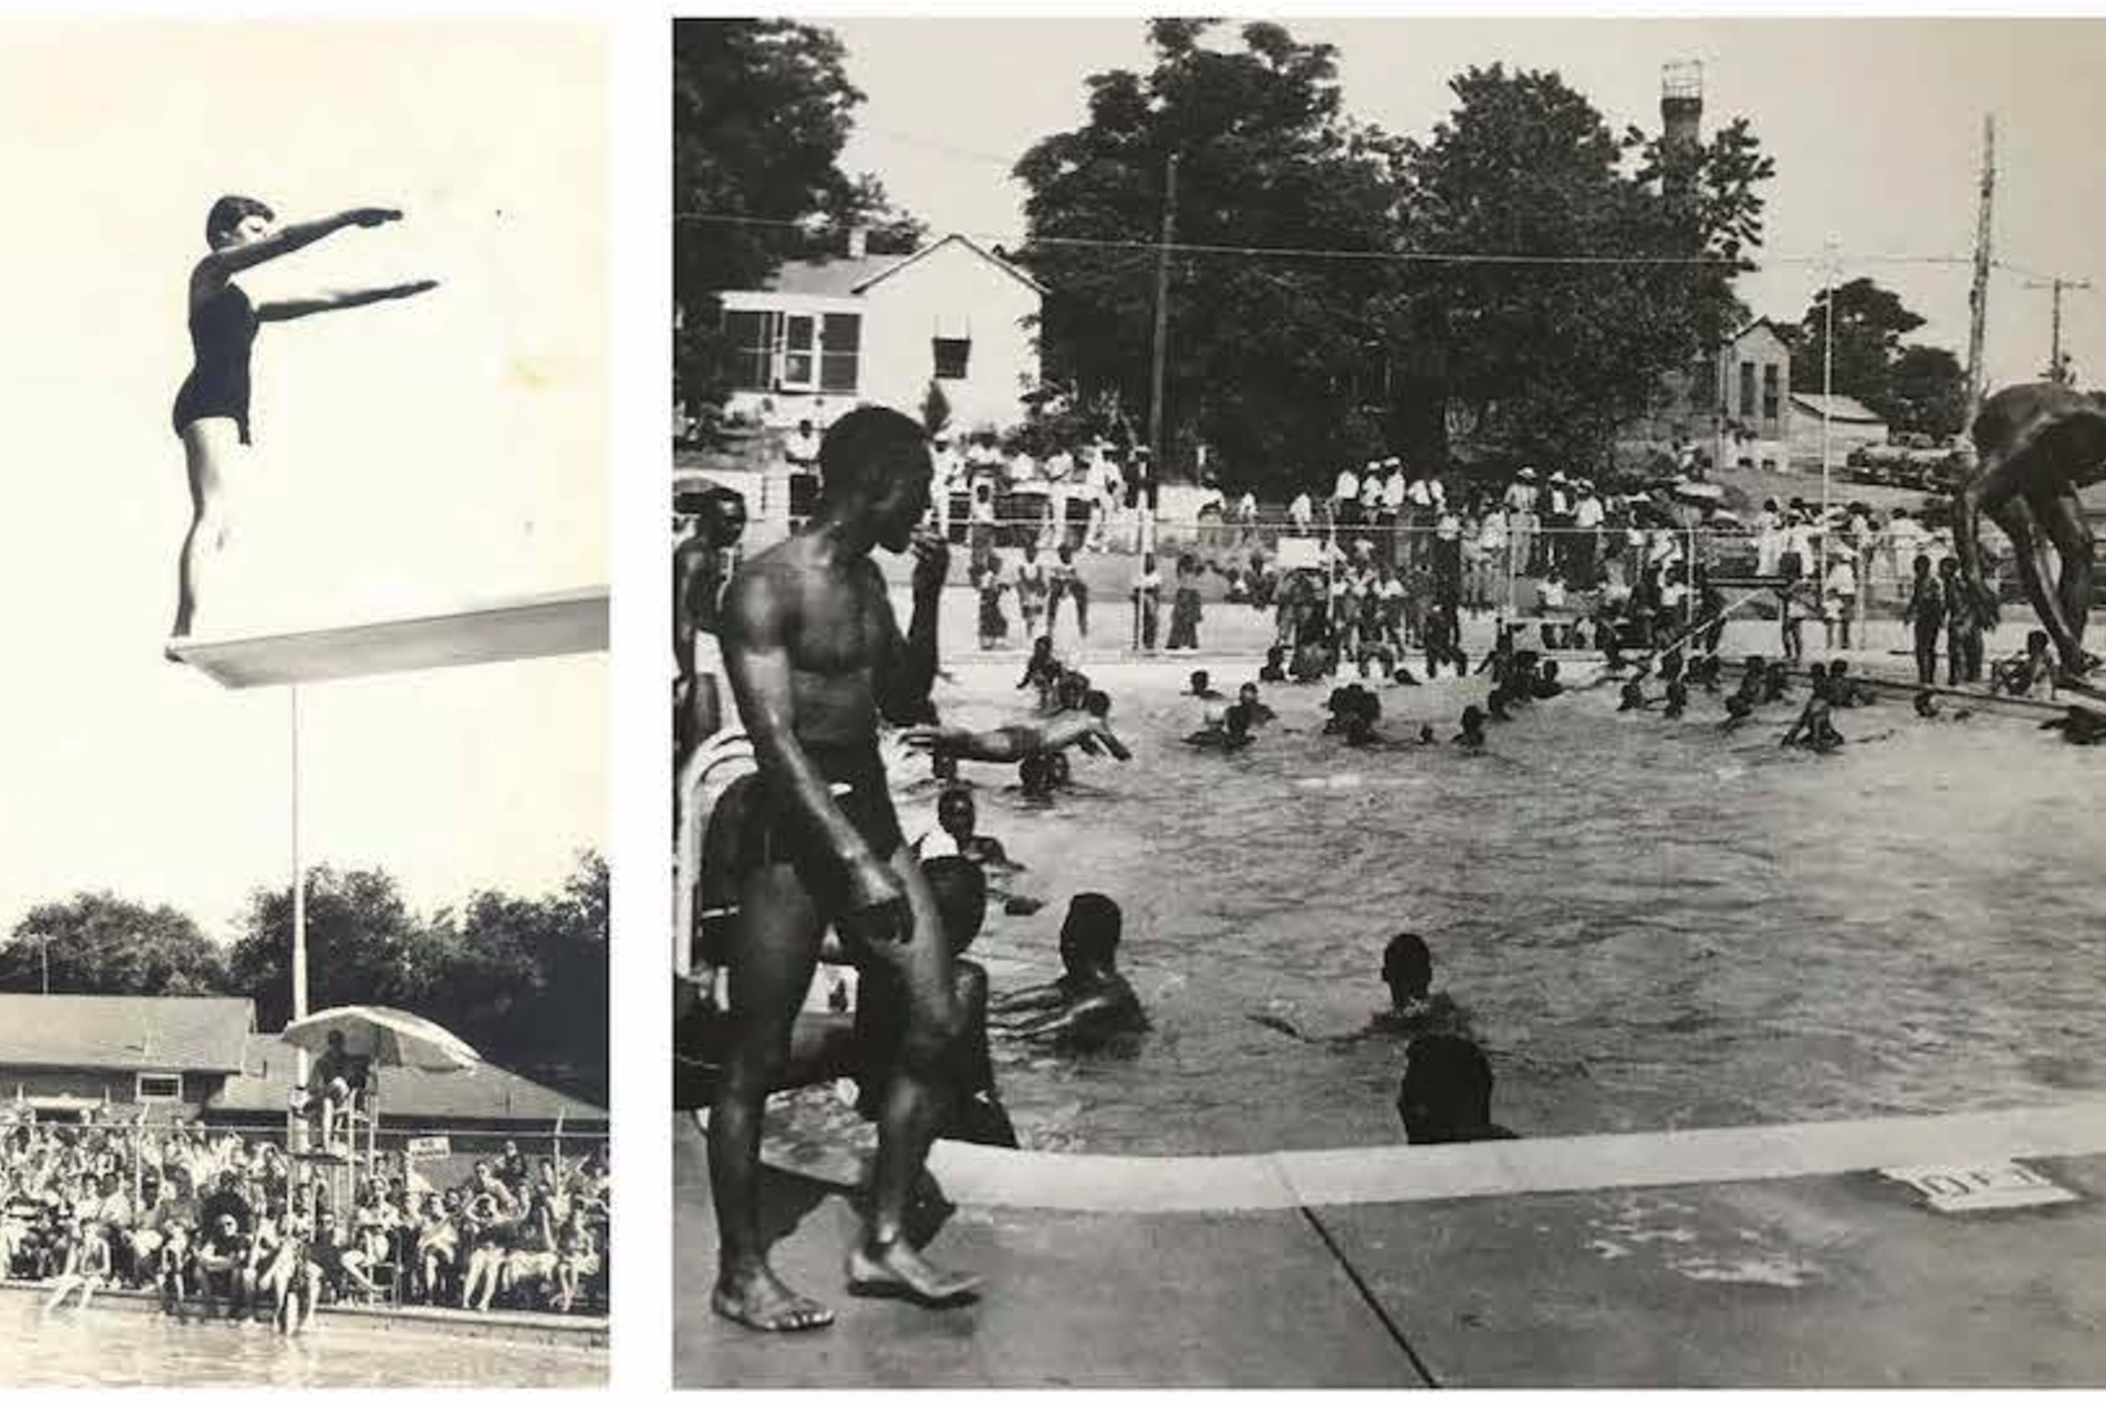 The Spring Avenue Pool (left) and Randall Street Pool (right) were segregated pools in East Point that were closed at the time of racial integration in Georgia. Hannah Palmer's "Ghost Pools" exhibit explores the complex history of public pools in Georgia.